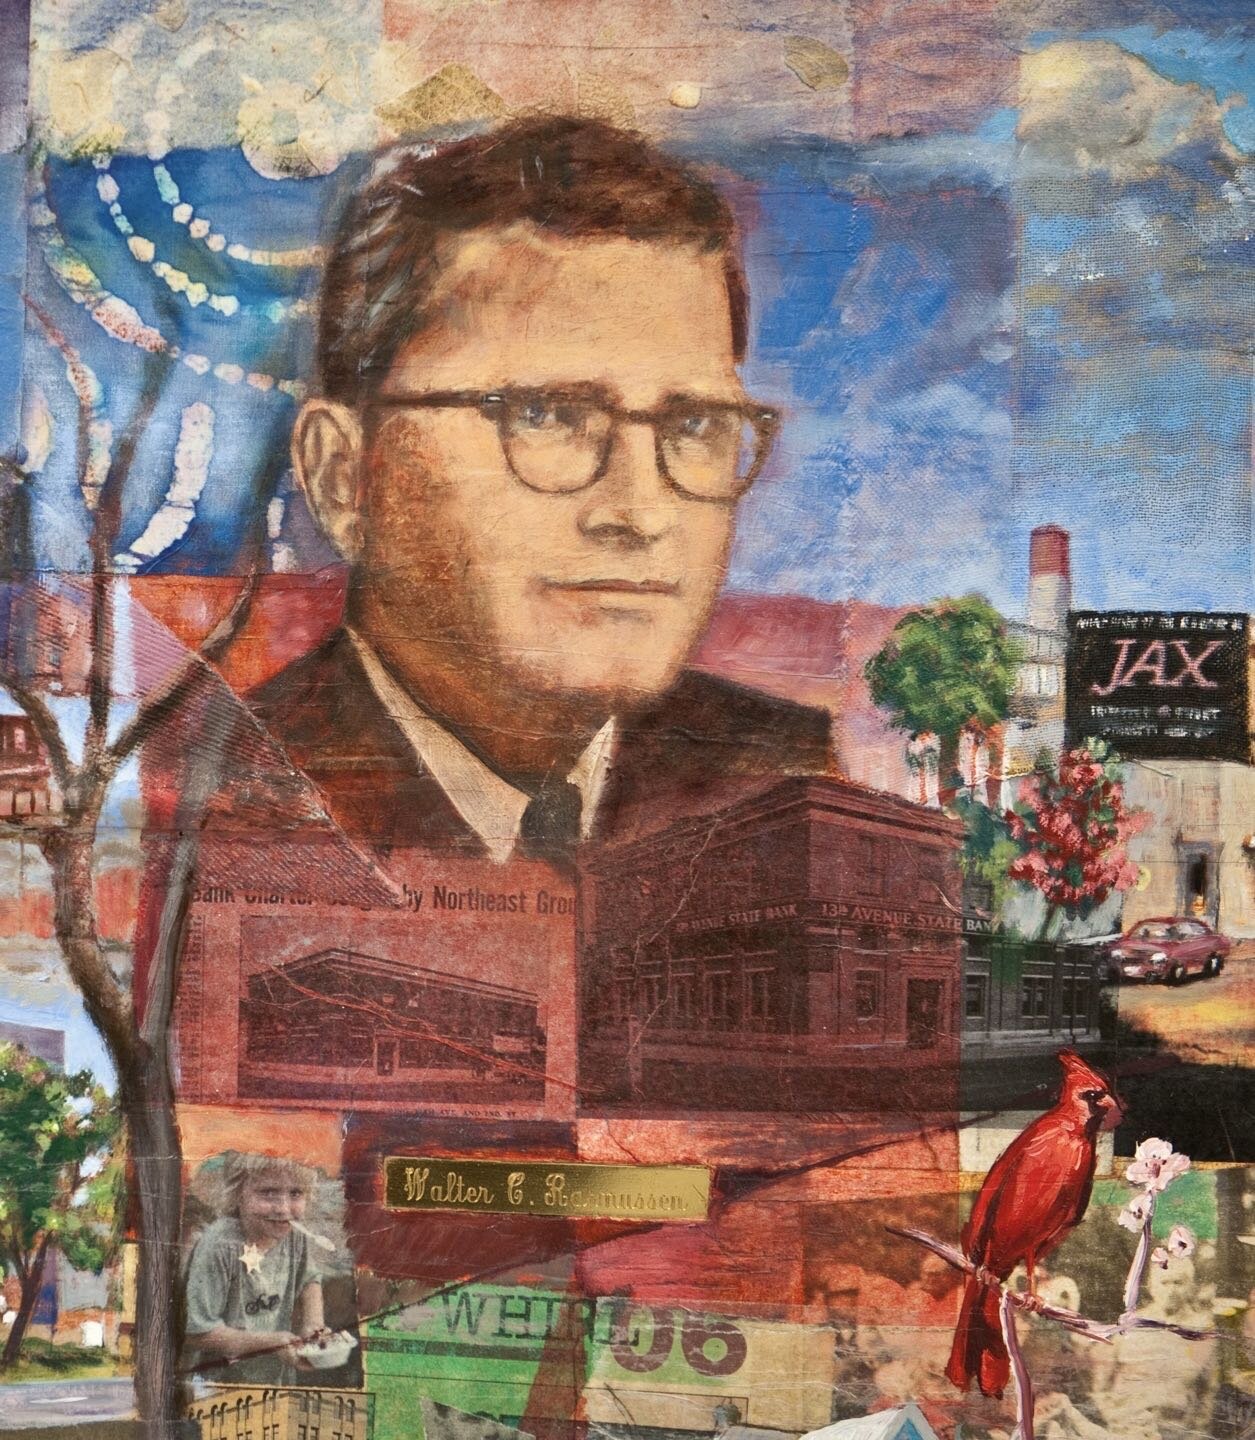 Portrait of Walter C. Rasmussen, detail from &quot;Northeast Bank Under the Sky&quot;  mixed media on plywood.  #norheastminneapolis #collageart #mixedmediacollage #artcommisions #larte&egrave;bellamaiopreferiscoilmare